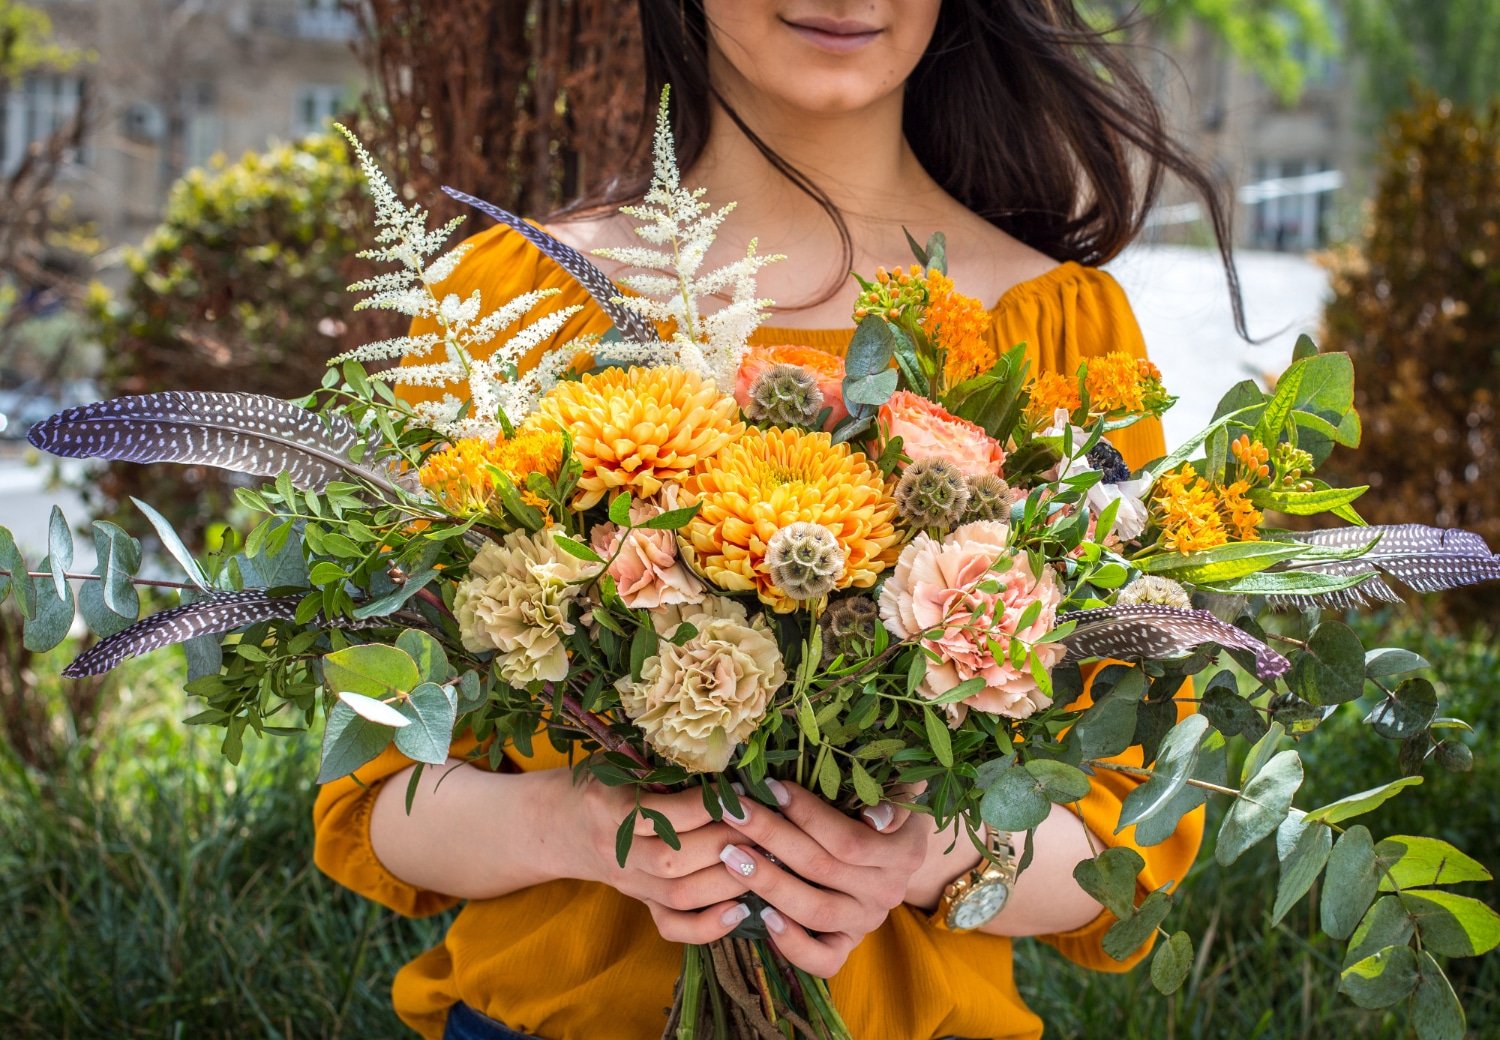 The Bouqs: Farm-Fresh Flowers Delivered Direct to Your Door